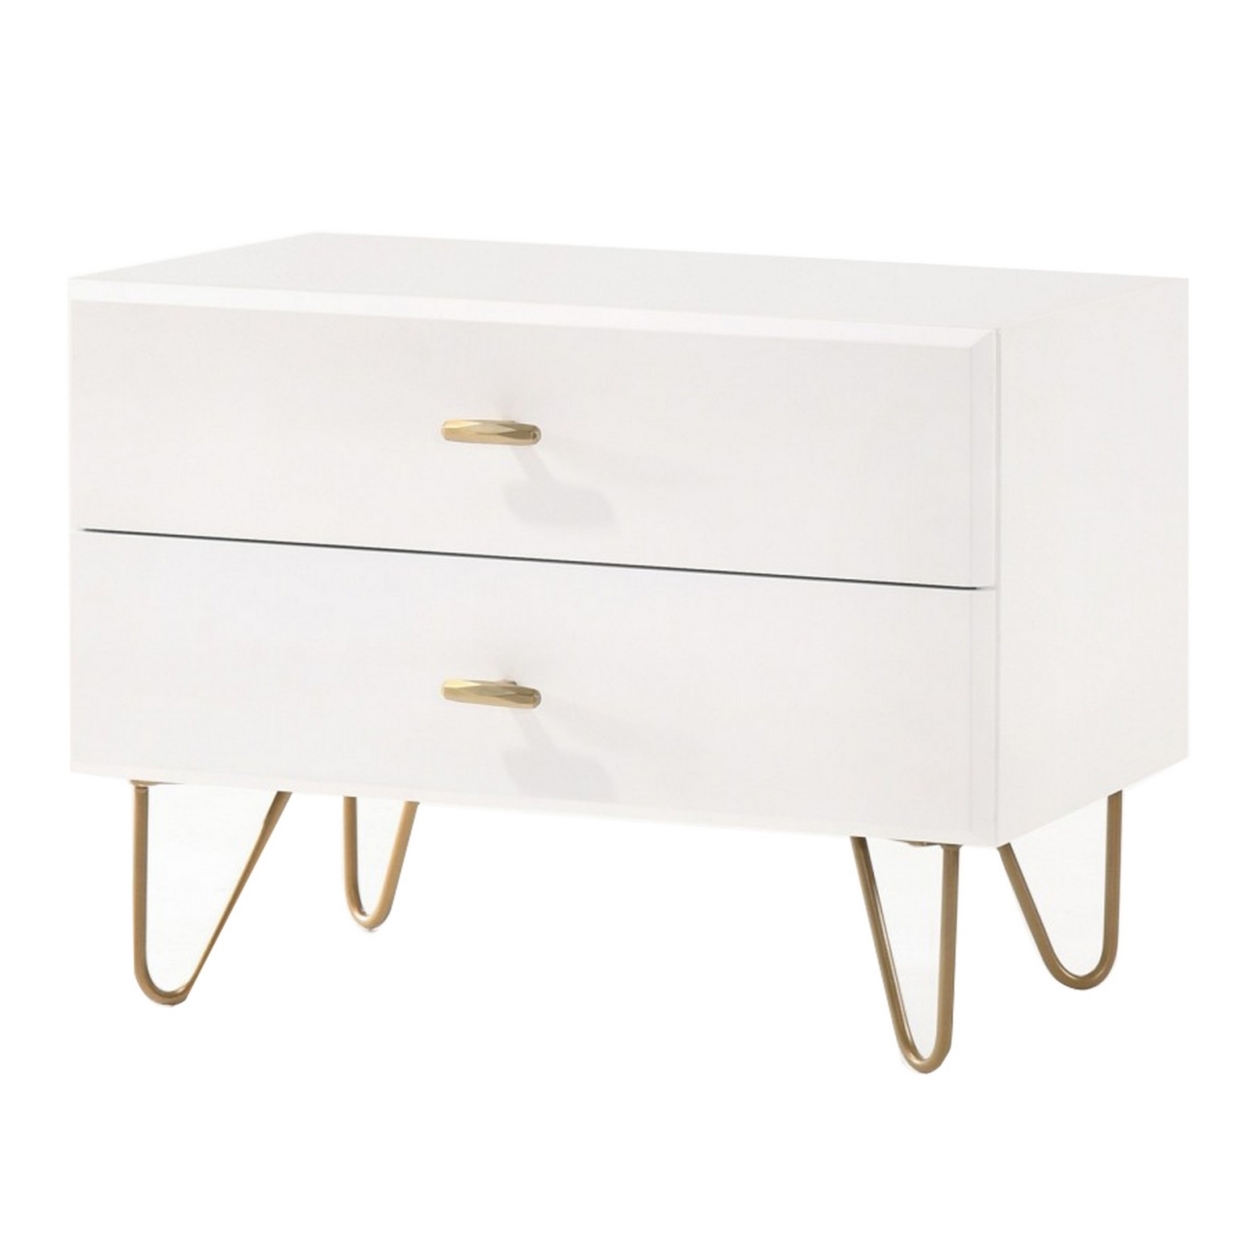 2 Drawer Wooden Nightstand With Metal Pulls And Hairpin Legs,White And Gold- Saltoro Sherpi